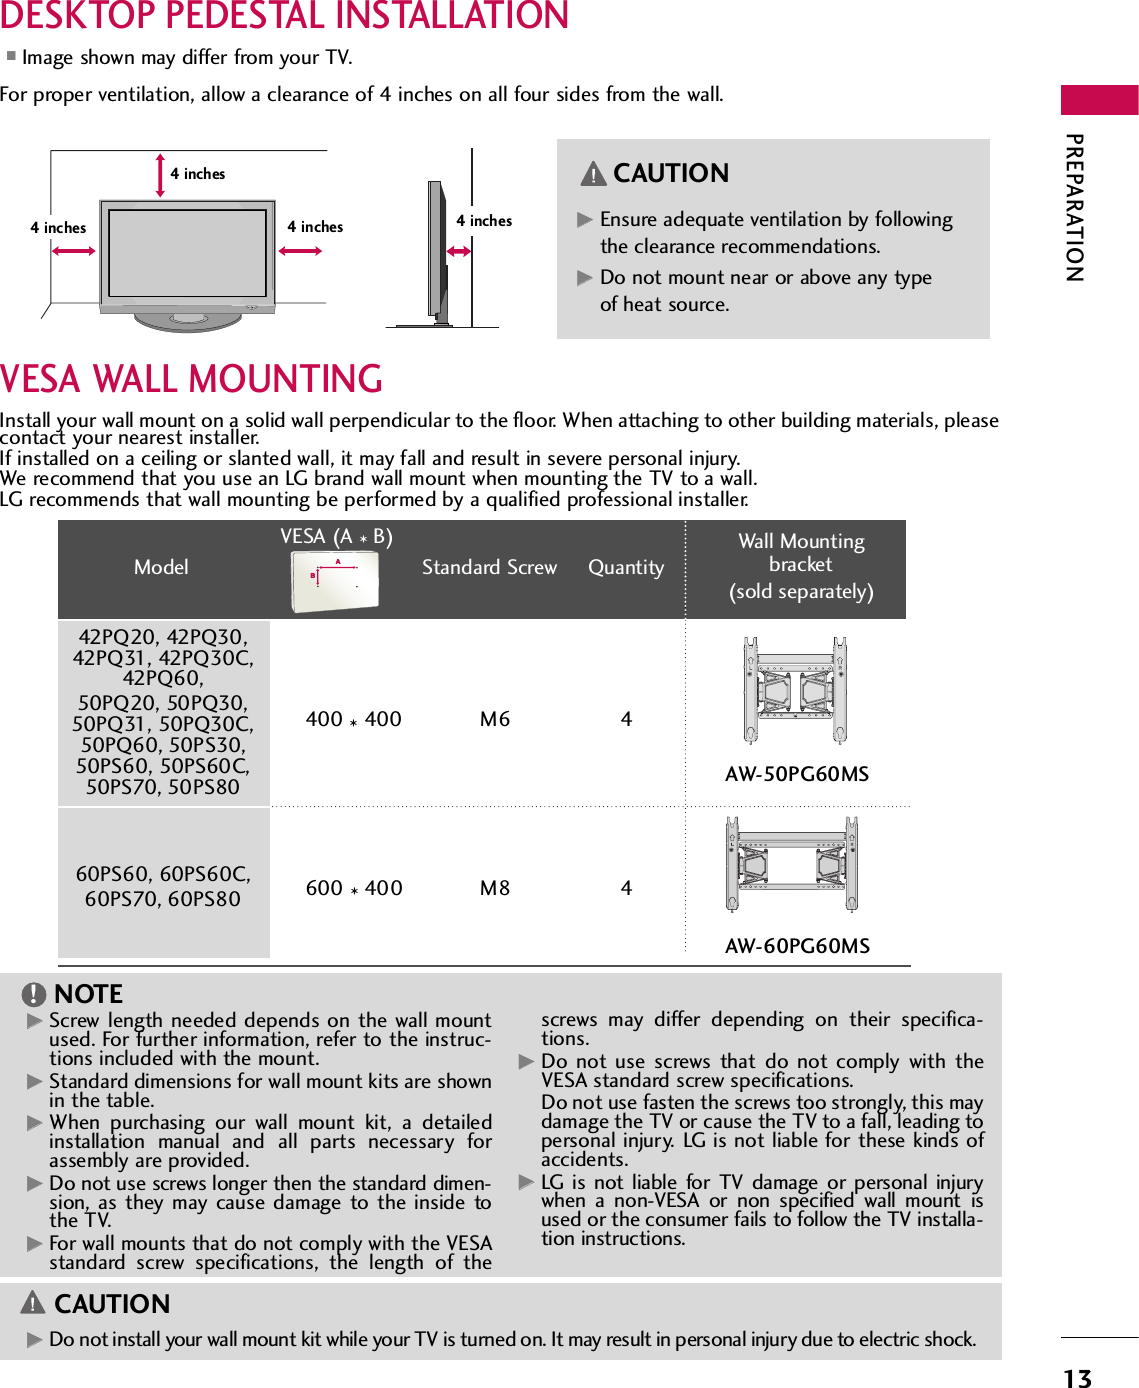 PREPARATION13VESA WALL MOUNTINGInstall your wall mount on a solid wall perpendicular to the floor. When attaching to other building materials, pleasecontact your nearest installer.If installed on a ceiling or slanted wall, it may fall and result in severe personal injury.We recommend that you use an LG brand wall mount when mounting the TV to a wall.LG recommends that wall mounting be performed by a qualified professional installer.GGDo not install your wall mount kit while your TV is turned on. It may result in personal injury due to electric shock.CAUTIONGGScrew length needed depends on the wall mountused. For further information, refer to the instruc-tions included with the mount.GGStandard dimensions for wall mount kits are shownin the table.GGWhen purchasing our wall mount kit, a detailedinstallation manual and all parts necessary forassembly are provided.GGDo not use screws longer then the standard dimen-sion, as they may cause damage to the inside tothe TV.GGFor wall mounts that do not comply with the VESAstandard screw specifications, the length of thescrews may differ depending on their specifica-tions.GGDo not use screws that do not comply with theVESA standard screw specifications.Do not use fasten the screws too strongly, this maydamage the TV or cause the TV to a fall, leading topersonal injury. LG is not liable for these kinds ofaccidents.GGLG is not liable for TV damage or personal injurywhen a non-VESA or non specified wall mount isused or the consumer fails to follow the TV installa-tion instructions.NOTE!DESKTOP PEDESTAL INSTALLATIONFor proper ventilation, allow a clearance of 4 inches on all four sides from the wall.■Image shown may differ from your TV.4 inches4 inches4 inches 4 inchesGGEnsure adequate ventilation by followingthe clearance recommendations.GGDo not mount near or above any typeof heat source.CAUTIONModelVESA (A *B)Standard Screw QuantityWall Mountingbracket(sold separately)42PQ20, 42PQ30,42PQ31, 42PQ30C,42PQ60,50PQ20, 50PQ30,50PQ31, 50PQ30C,50PQ60, 50PS30,50PS60, 50PS60C,50PS70, 50PS8060PS60, 60PS60C,60PS70, 60PS80400 * 400 M6 4600 * 400 M8 4AW-50PG60MSAABBAW-60PG60MS